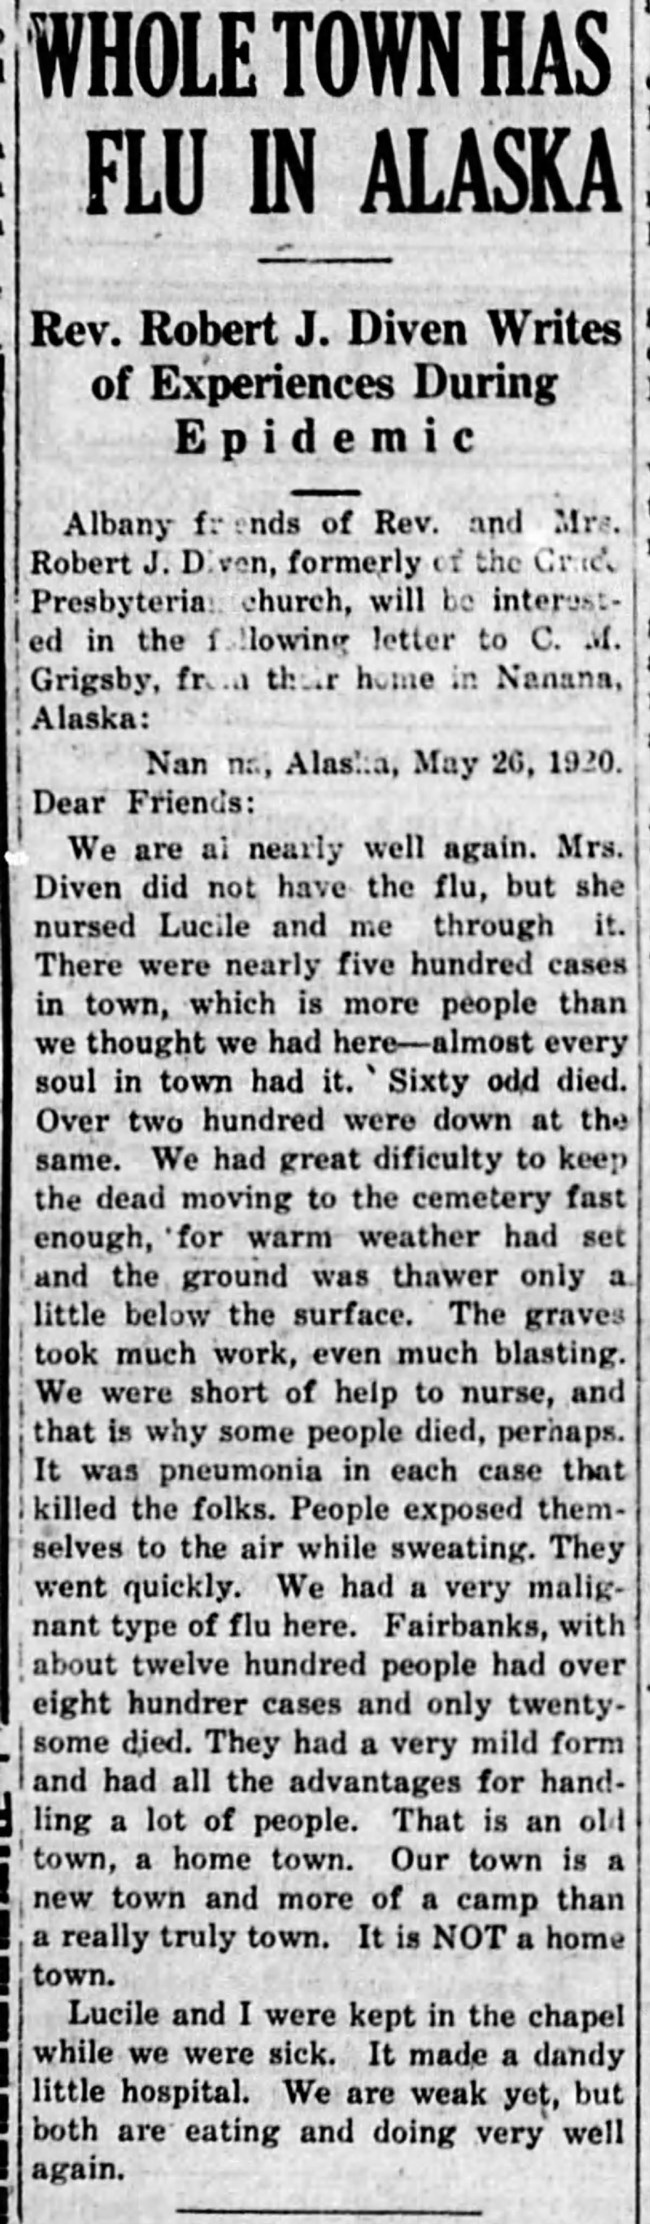 a newspaper article describing first hand how a flu strain killed sixty of five hundred people in the town of nenana, alaska